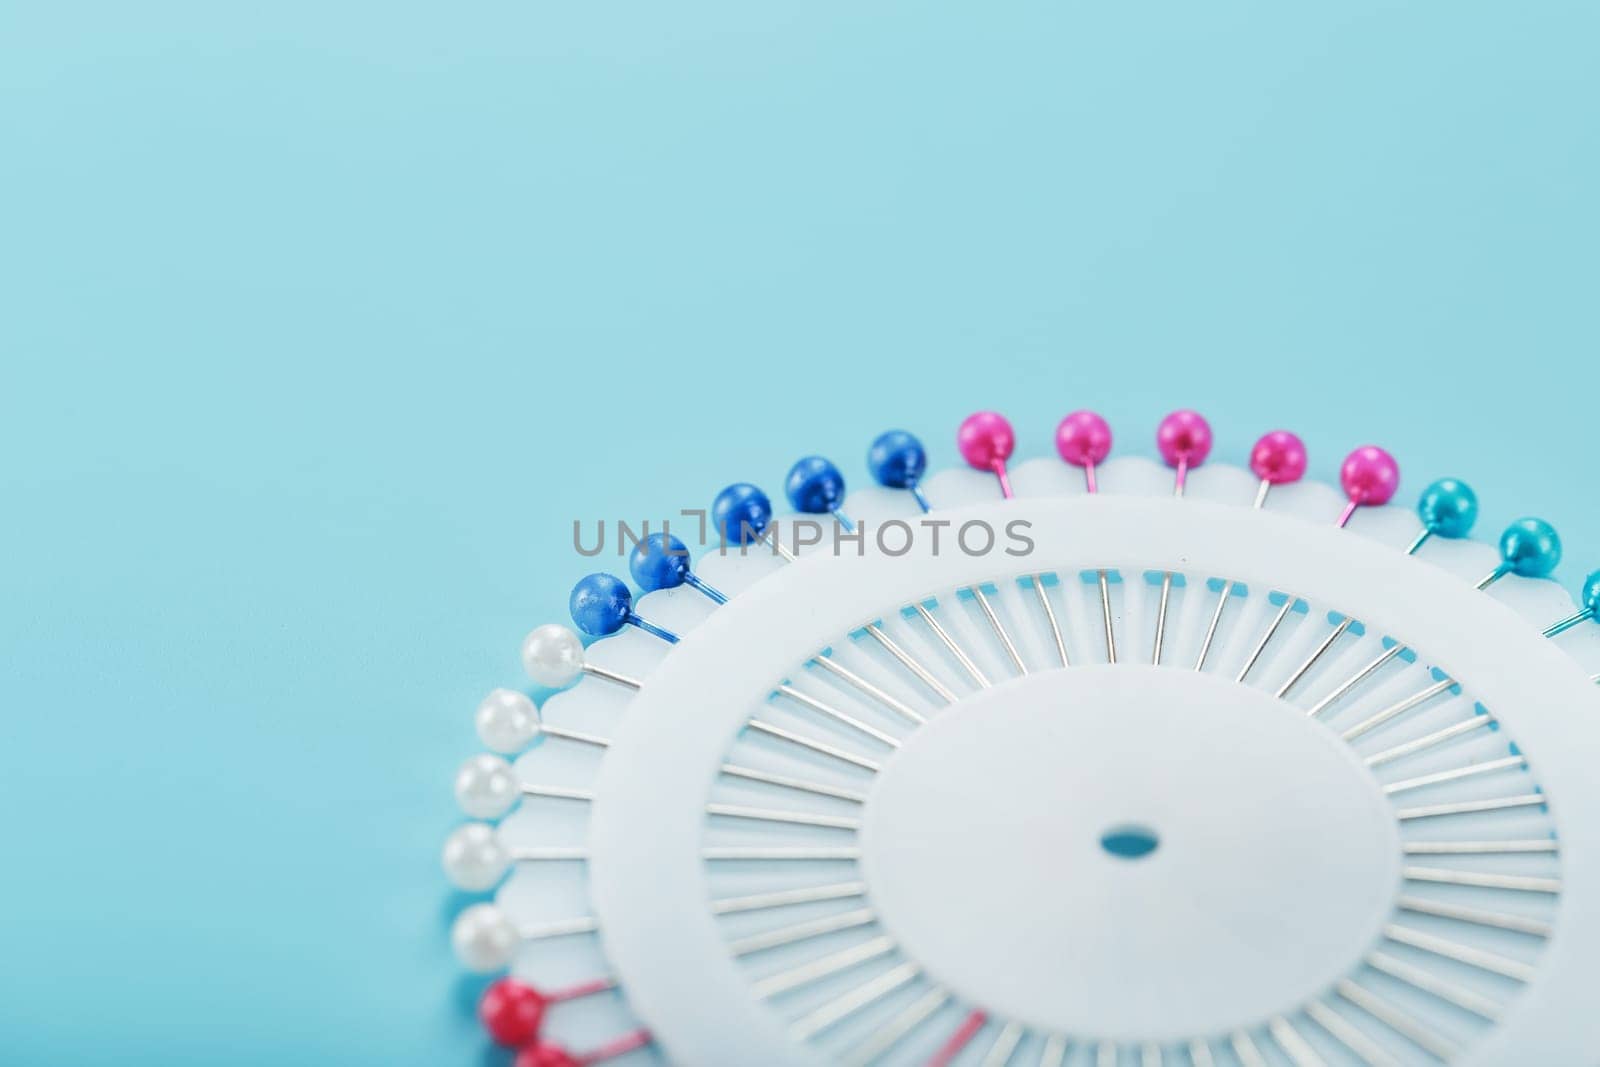 Sewing mother-of-pearl pins in a round white package on a blue background with free space